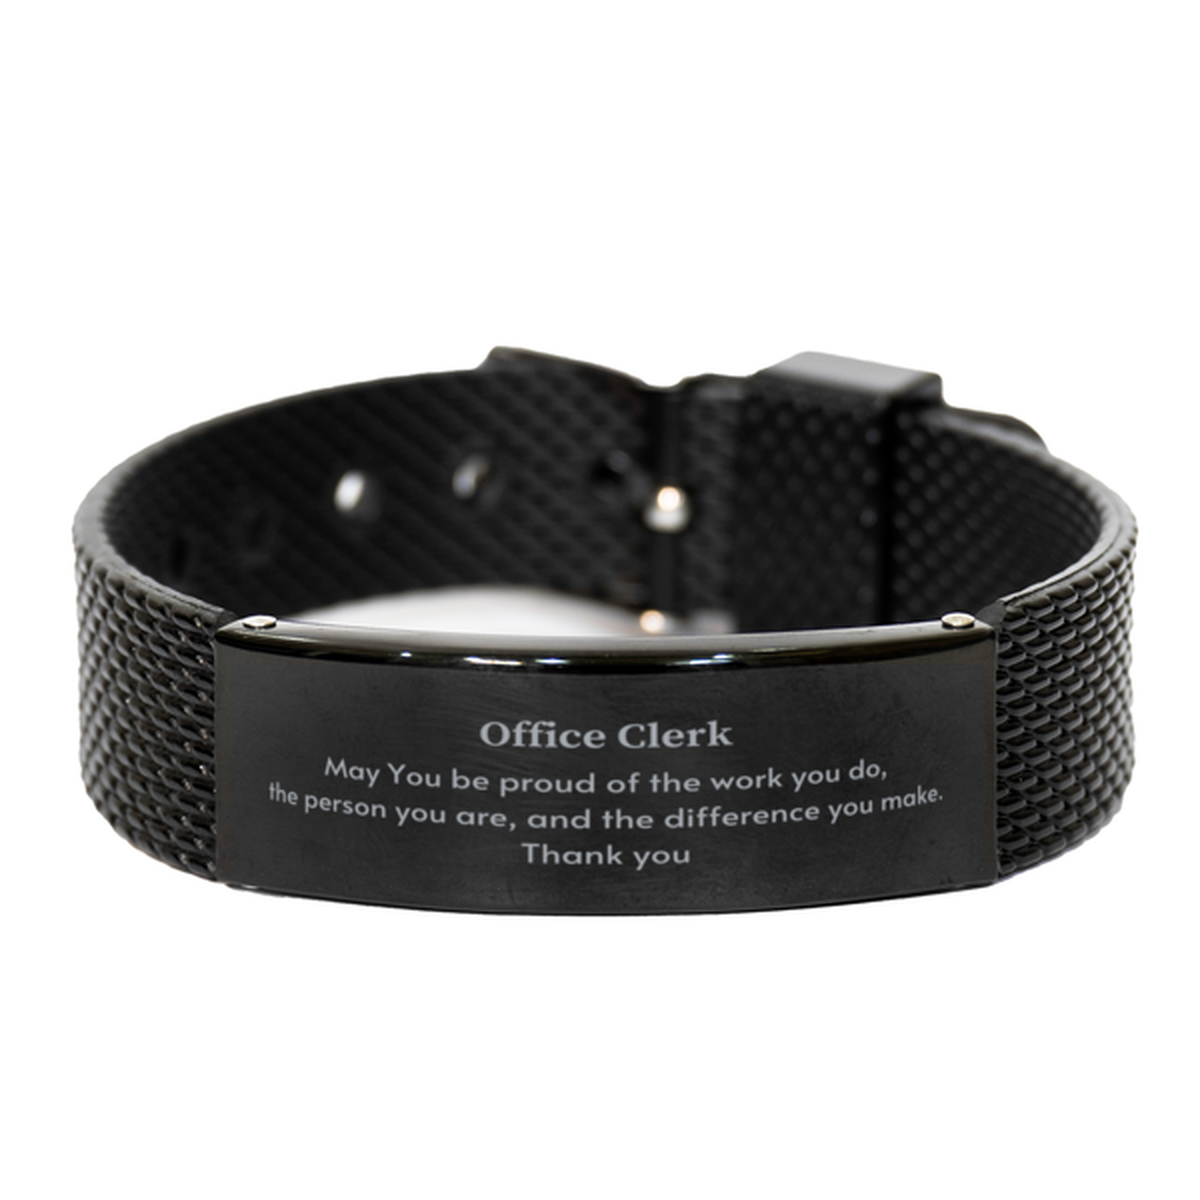 Heartwarming Black Shark Mesh Bracelet Retirement Coworkers Gifts for Office Clerk, Office Clerk May You be proud of the work you do, the person you are Gifts for Boss Men Women Friends